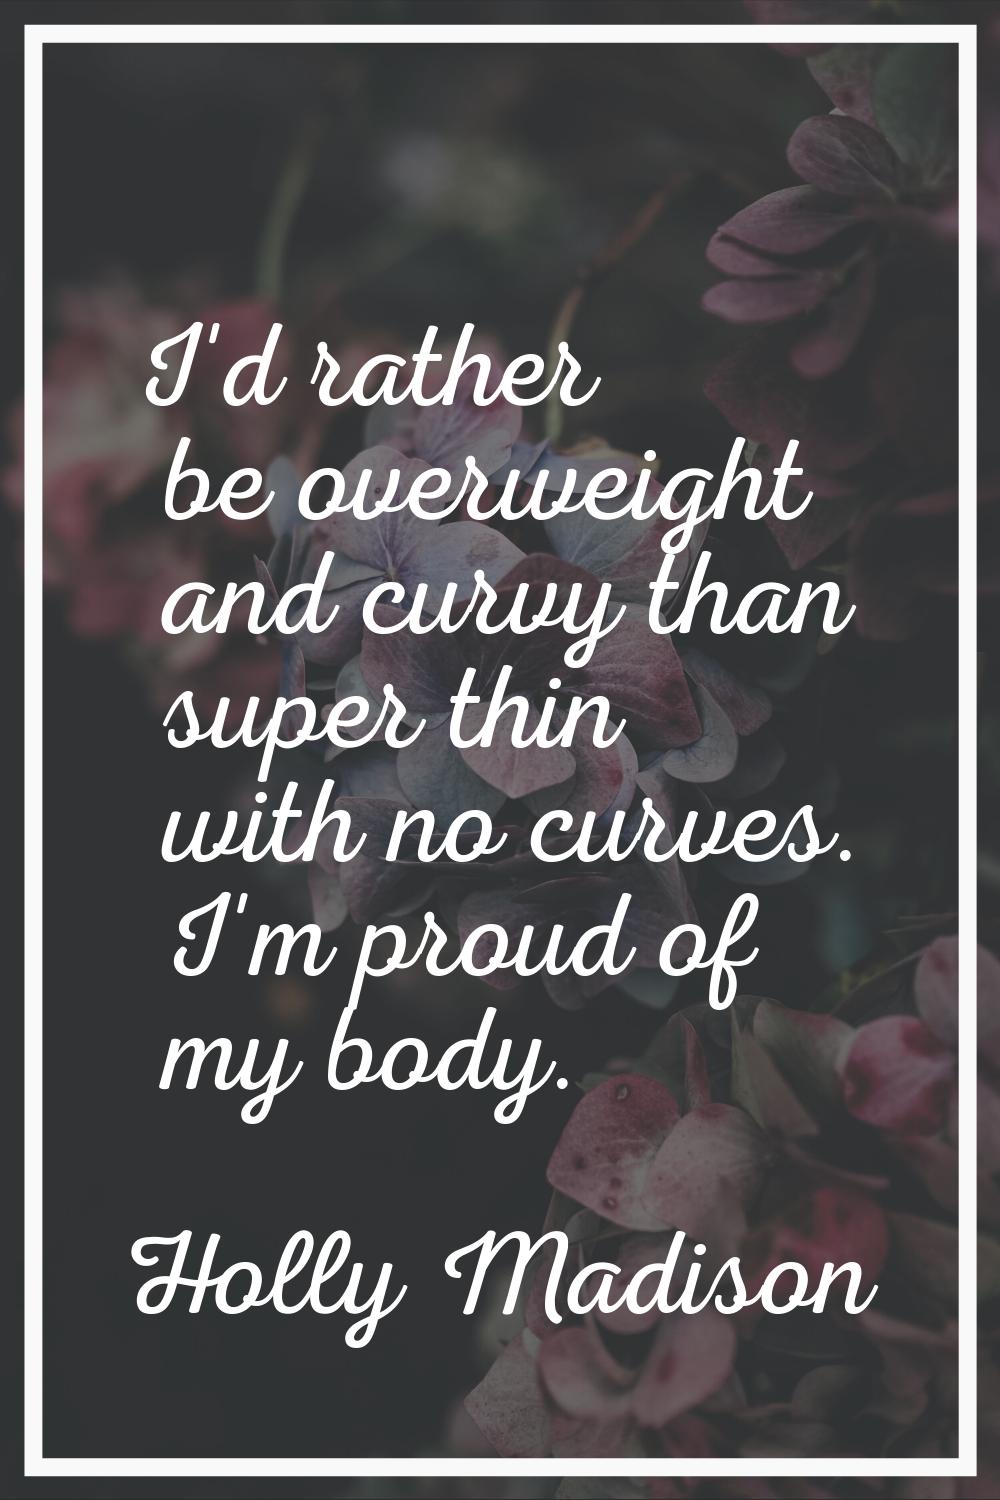 I'd rather be overweight and curvy than super thin with no curves. I'm proud of my body.